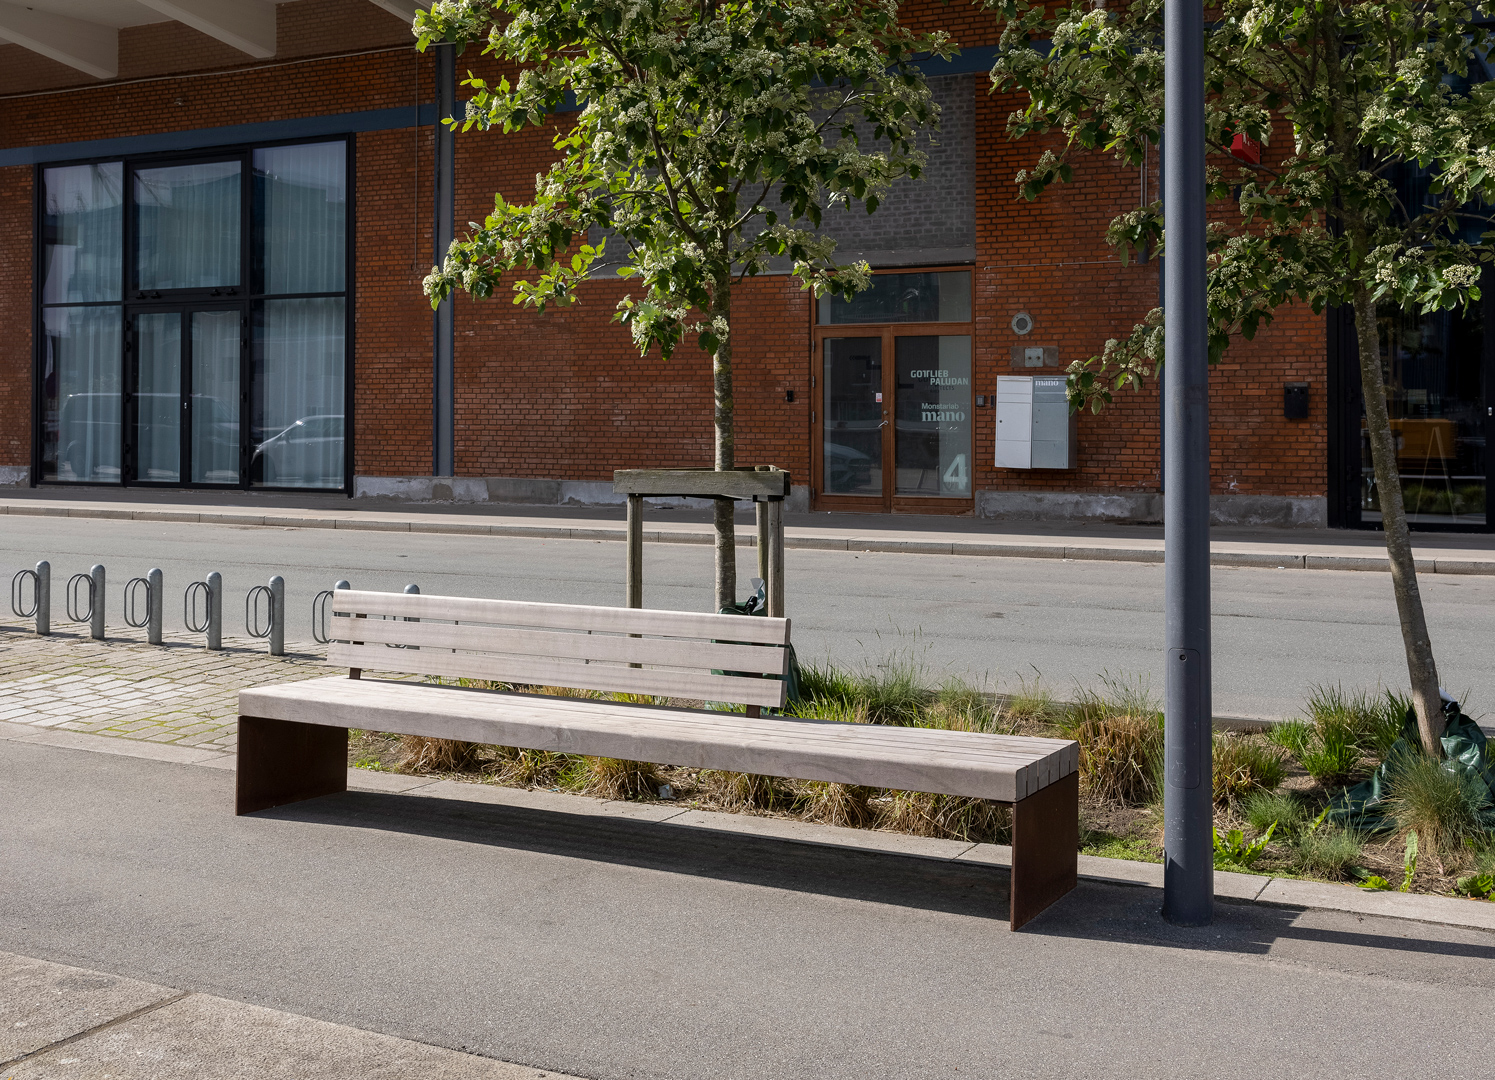 COSI park bench 3000 mm in length is seen in the street